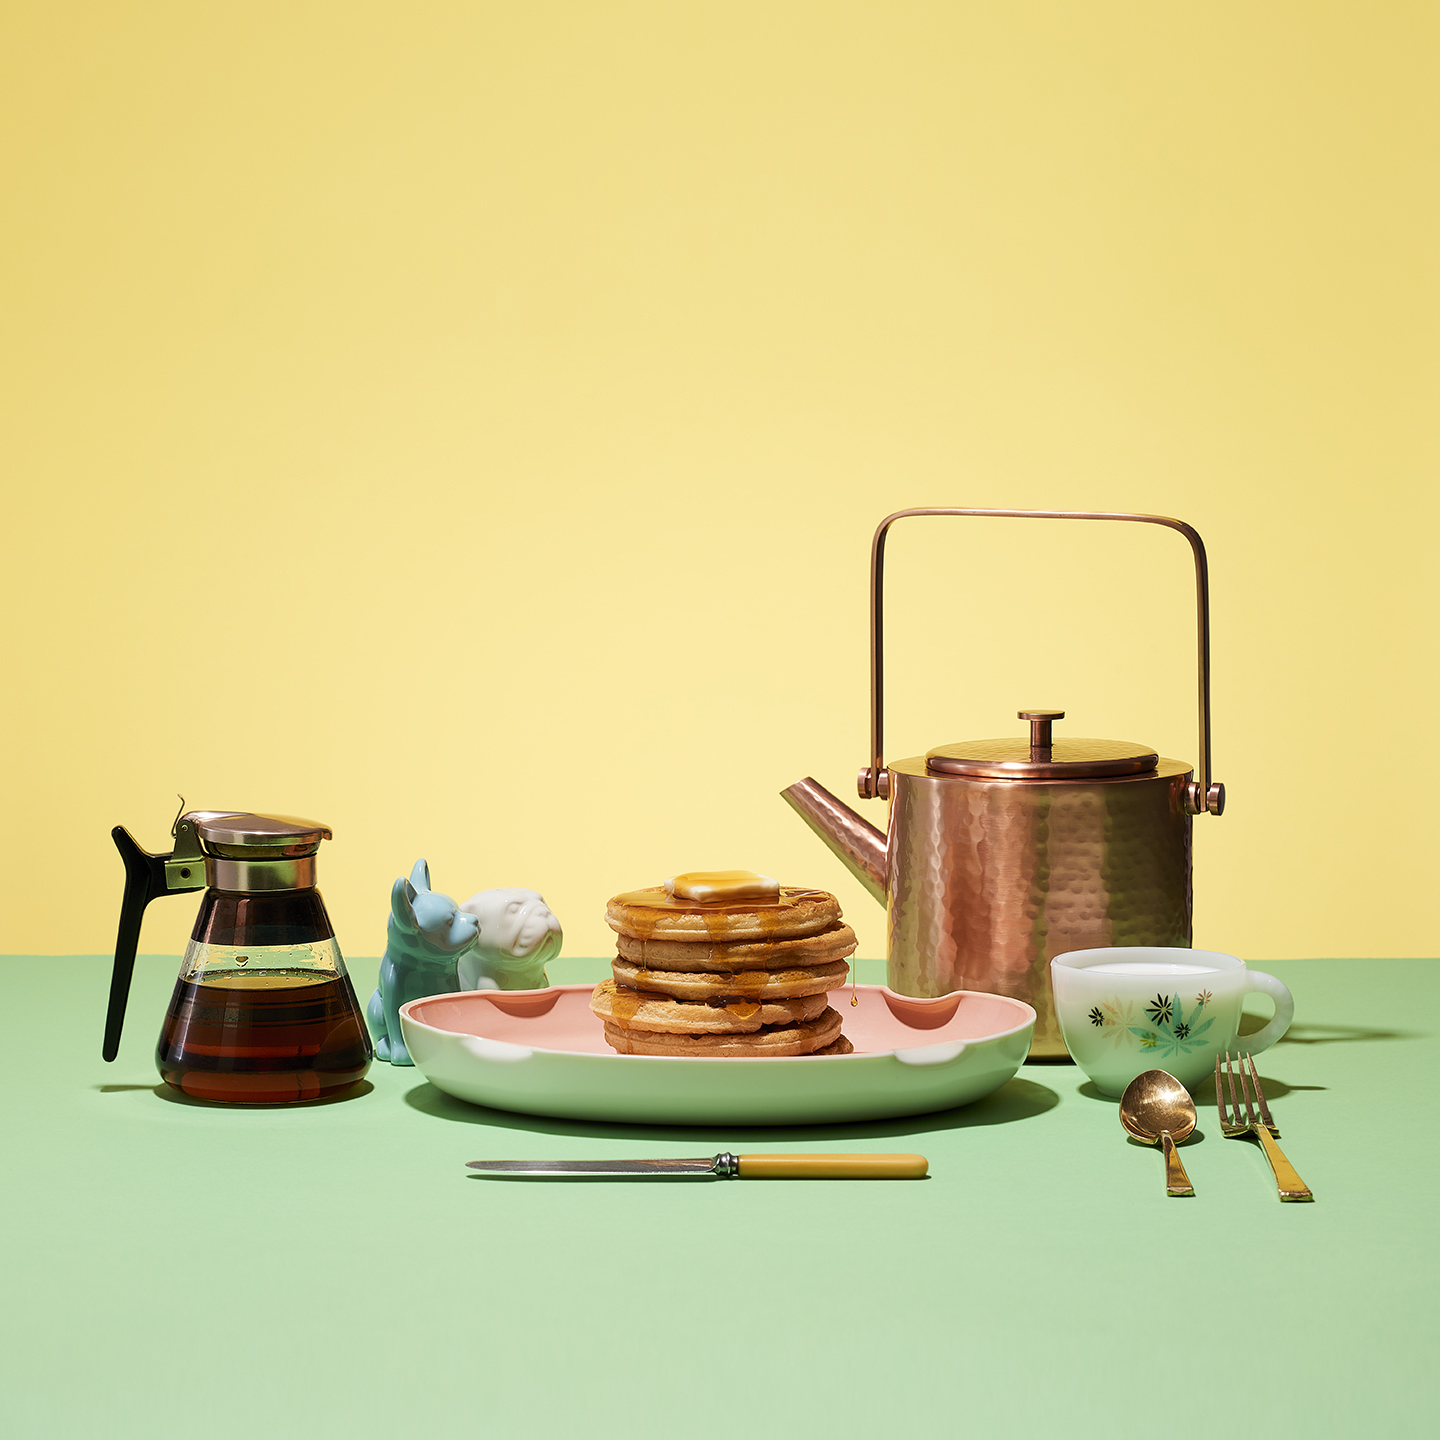 Waffle Breakfast photograph in Time Magazine styled by Jessica Stewart conceptual stylist based in LA